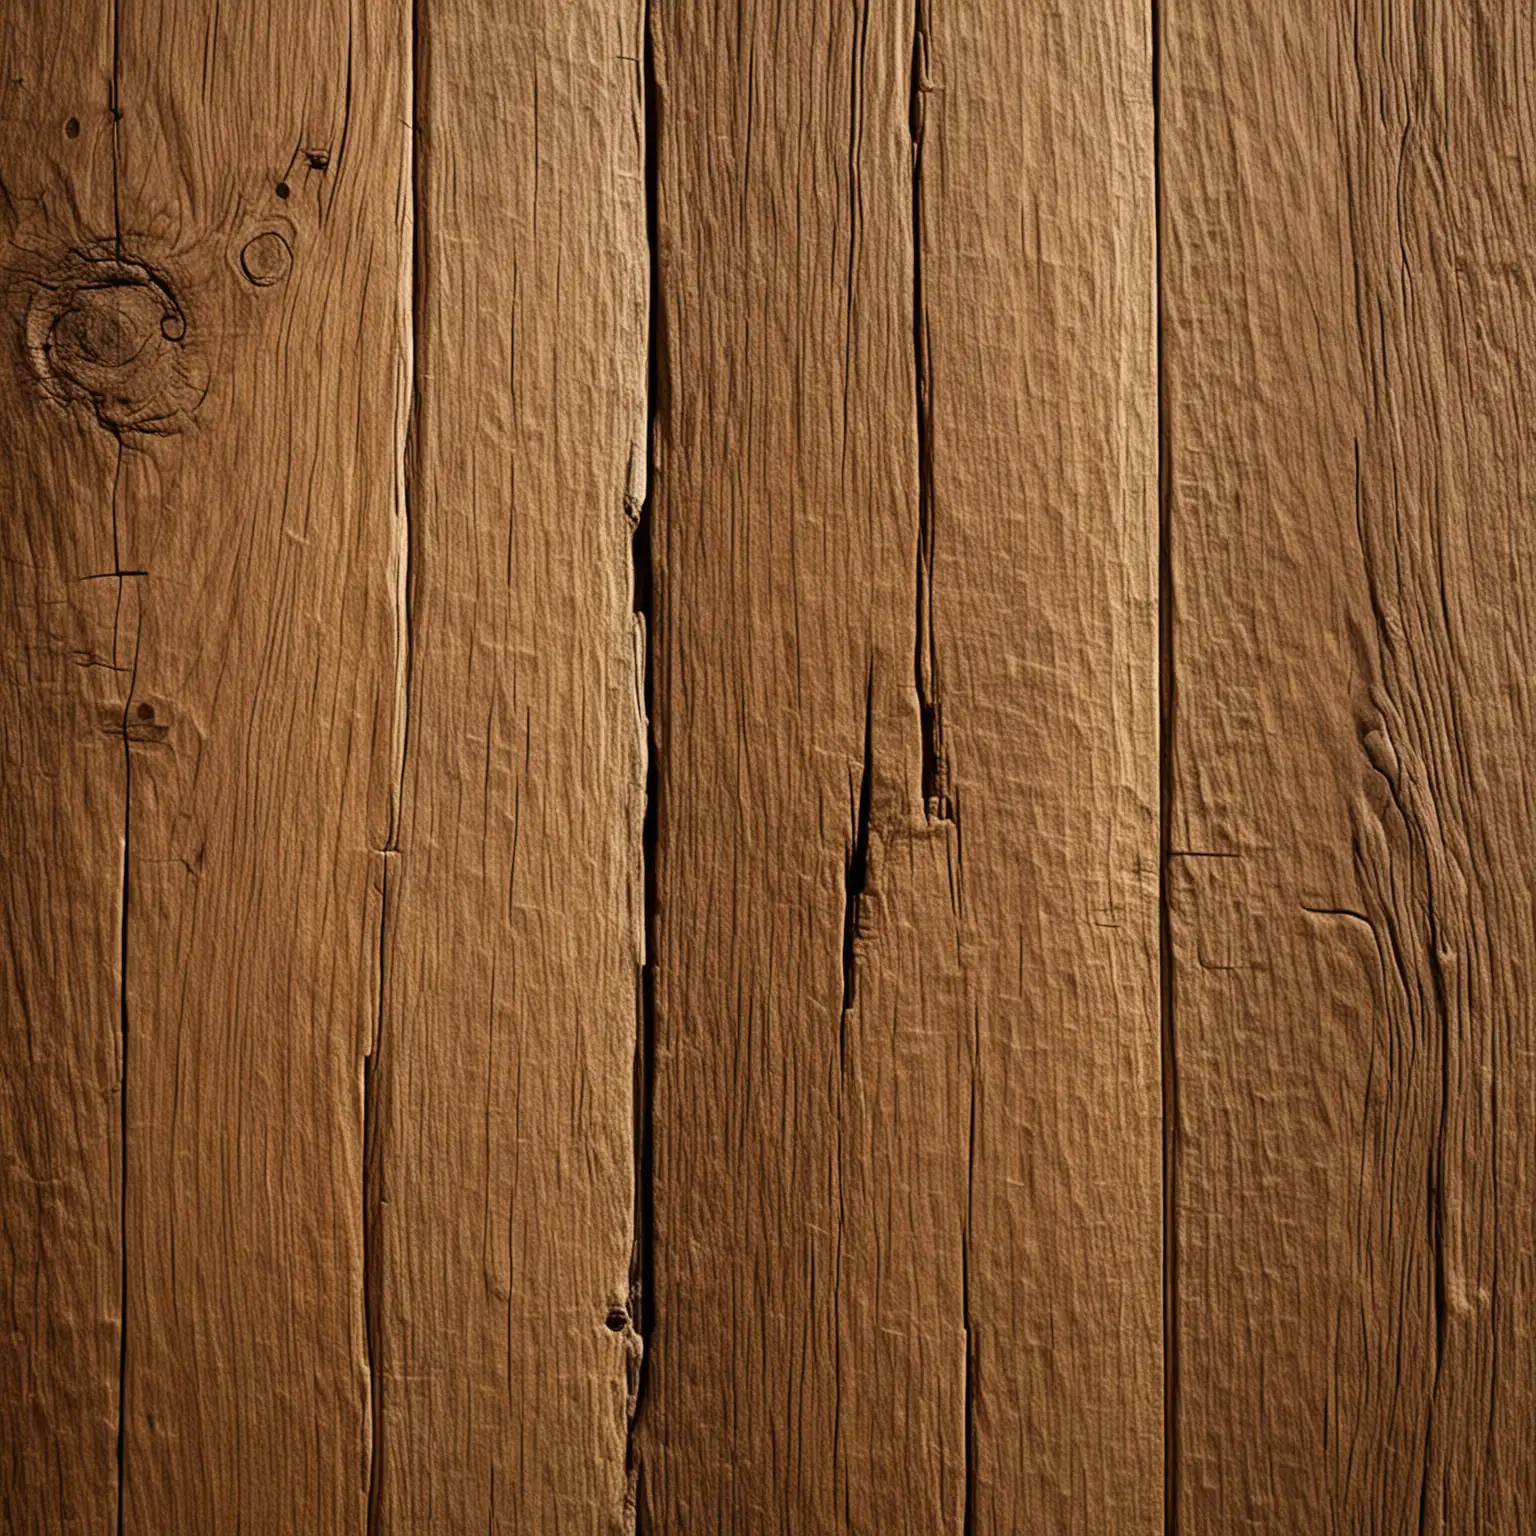 Wooden Textured Surface with Natural Grains and Weathered Edges